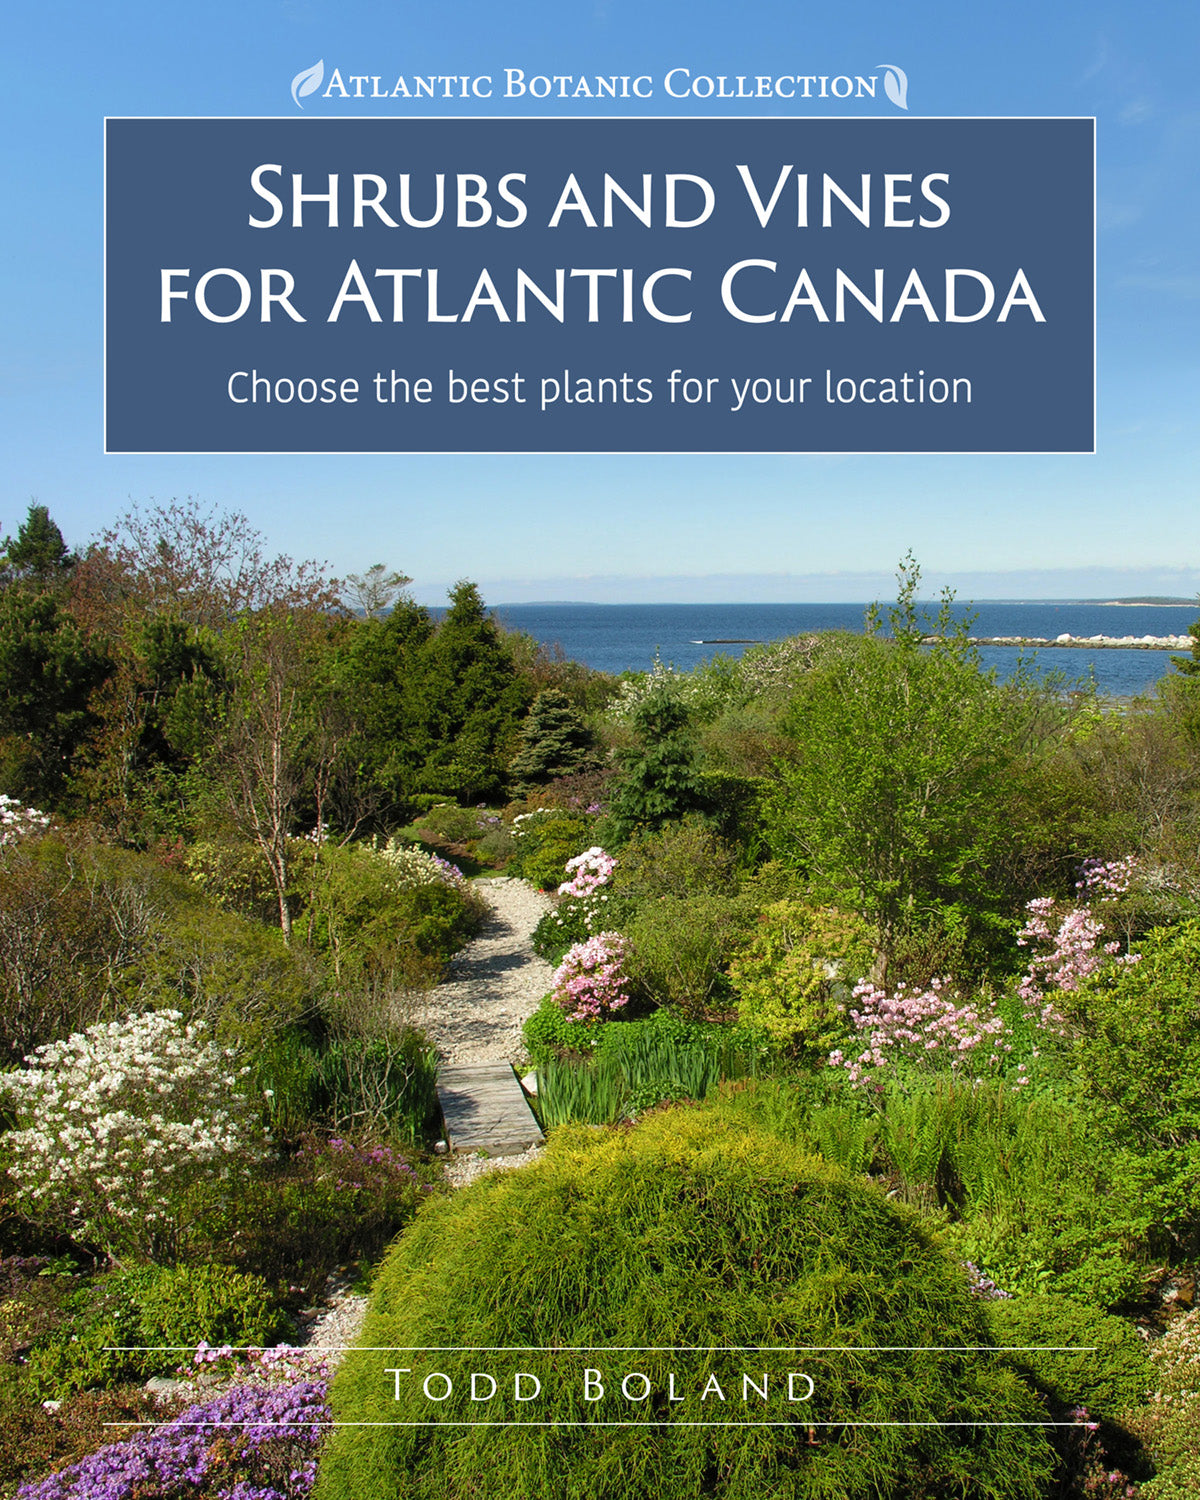 Shrubs and Vines for Atlantic Canada by Todd Boland